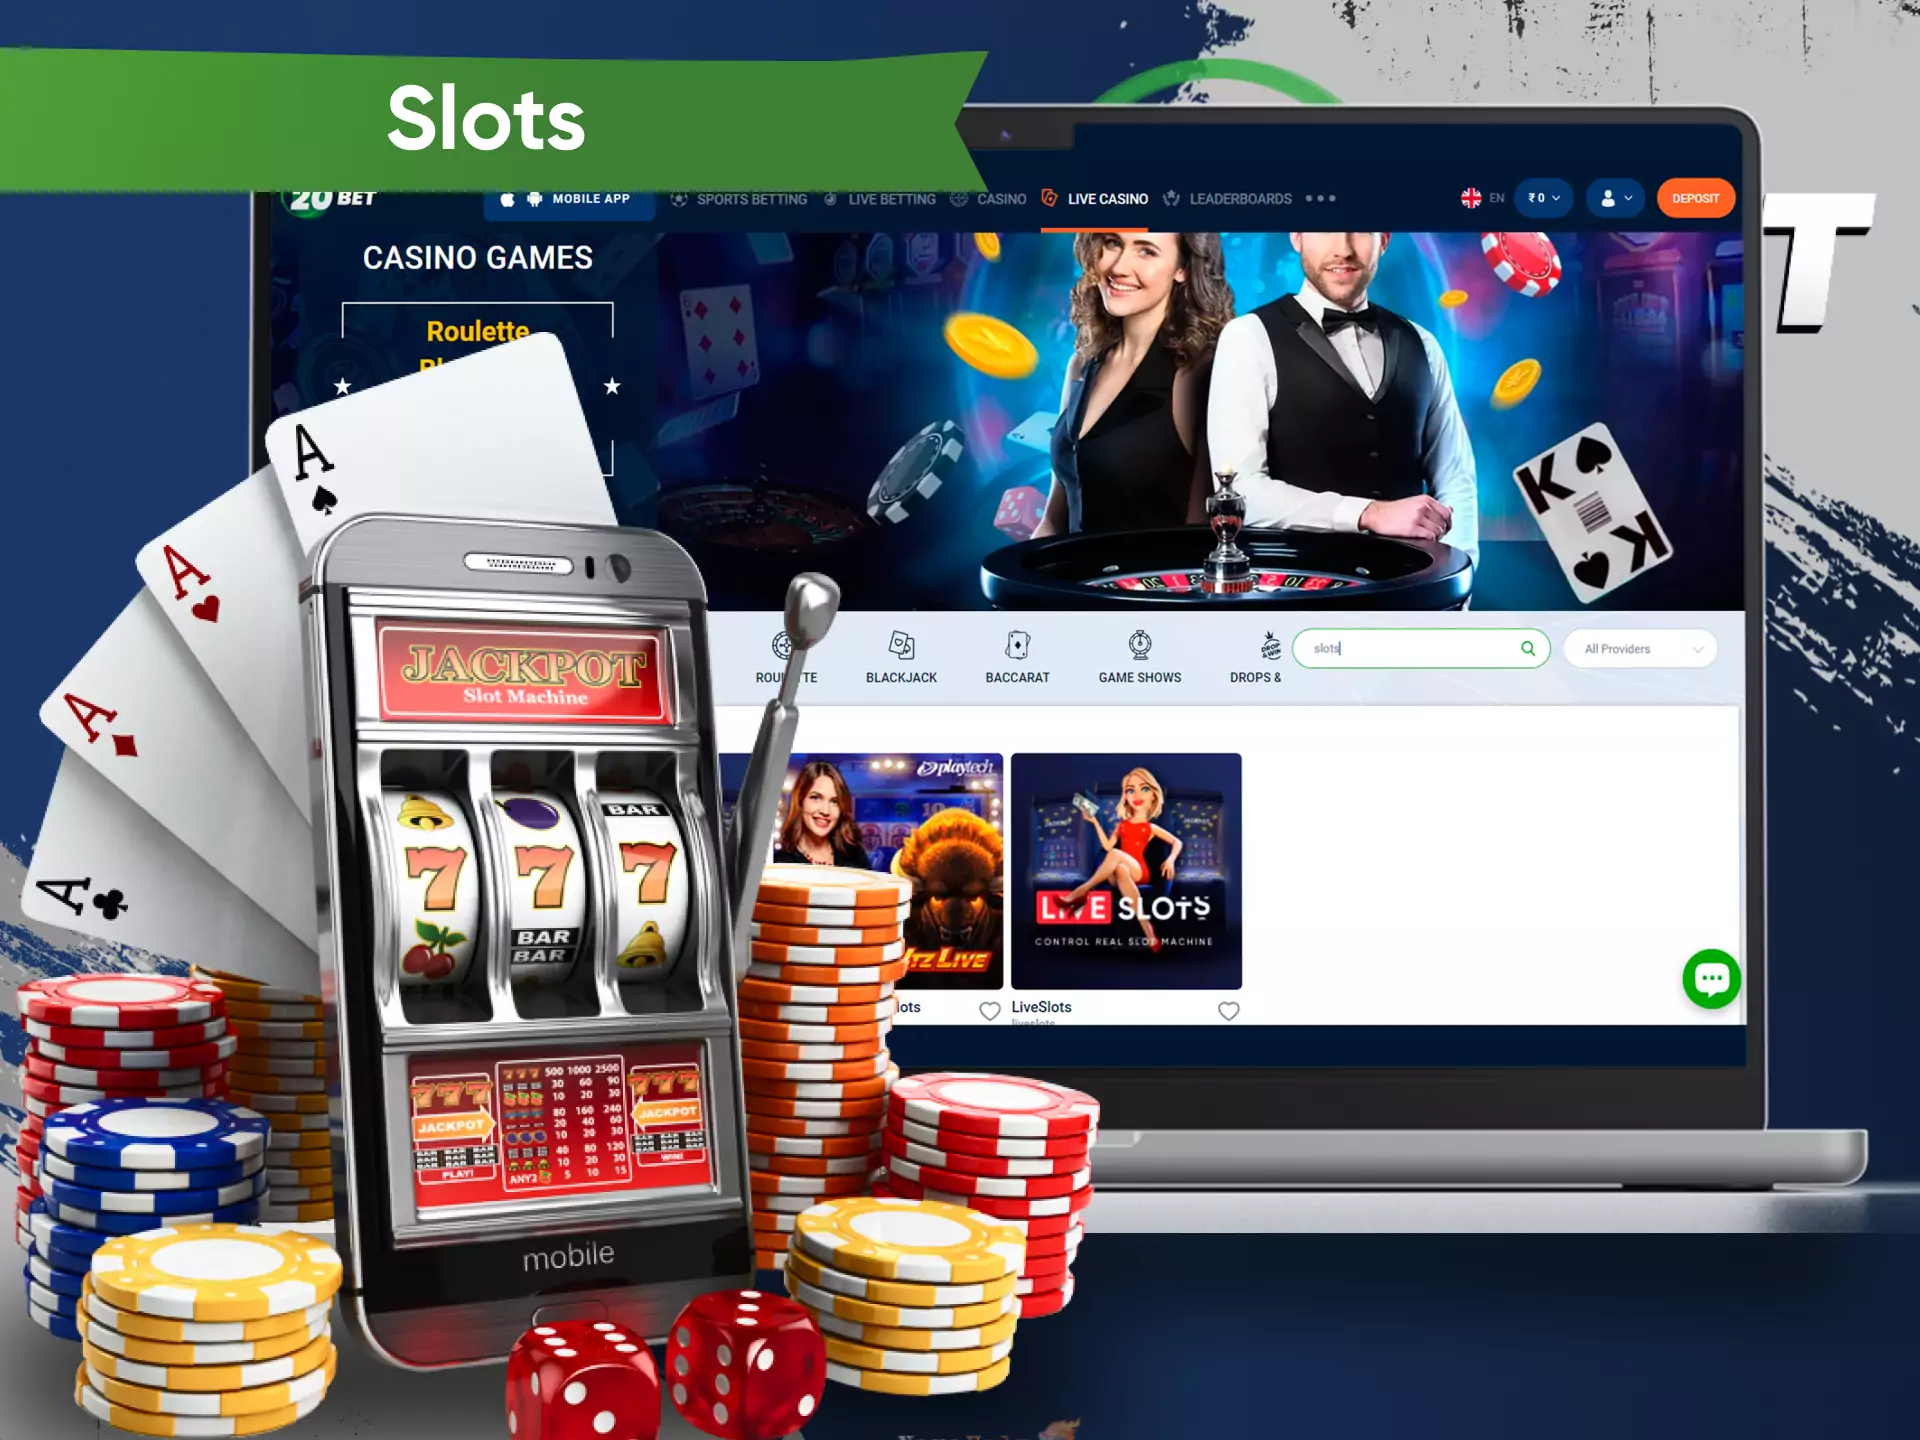 Visit the 20bet casino to try colourful online slot machines.